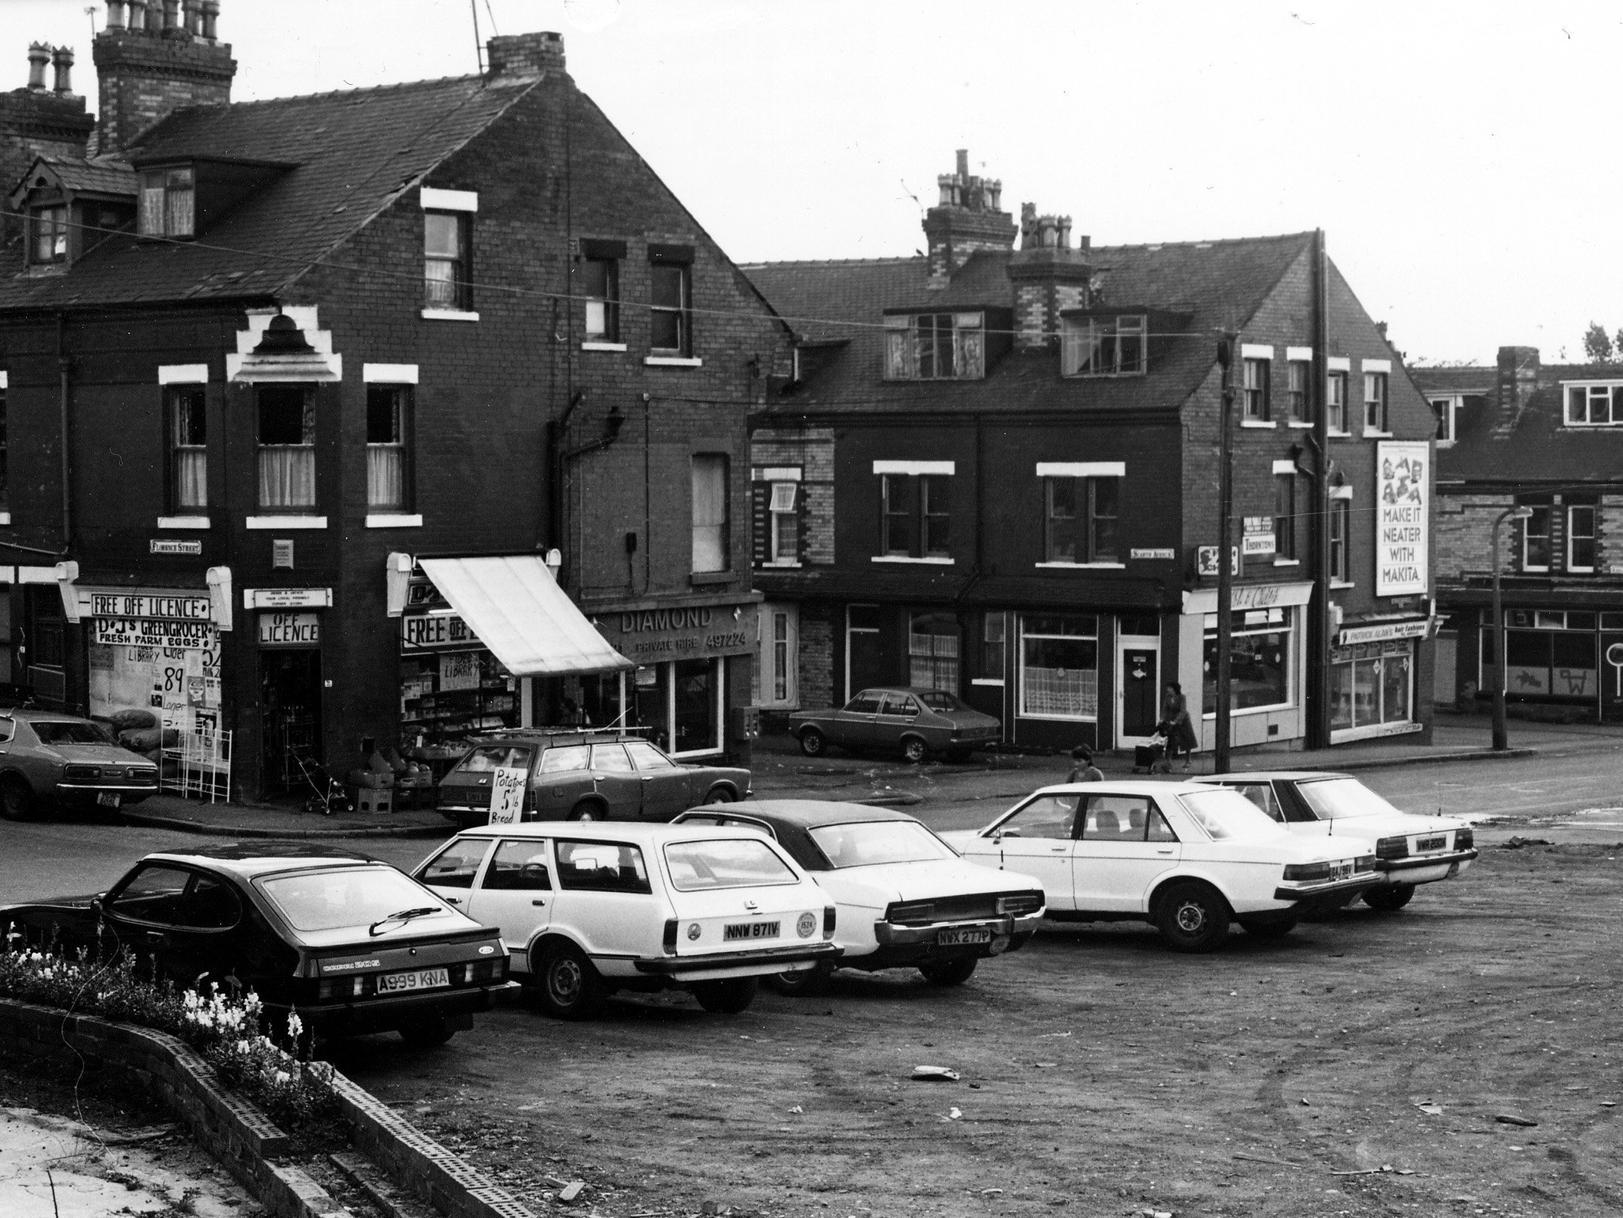 Ashley Road showing junctions with Florence Street, Scarth Avenue and Ashley Terrace. Shops in view are DJ's greengrocers and off licence, Diamond Taxis, a fish and chip shop and Patrick Alan's hairdressers.